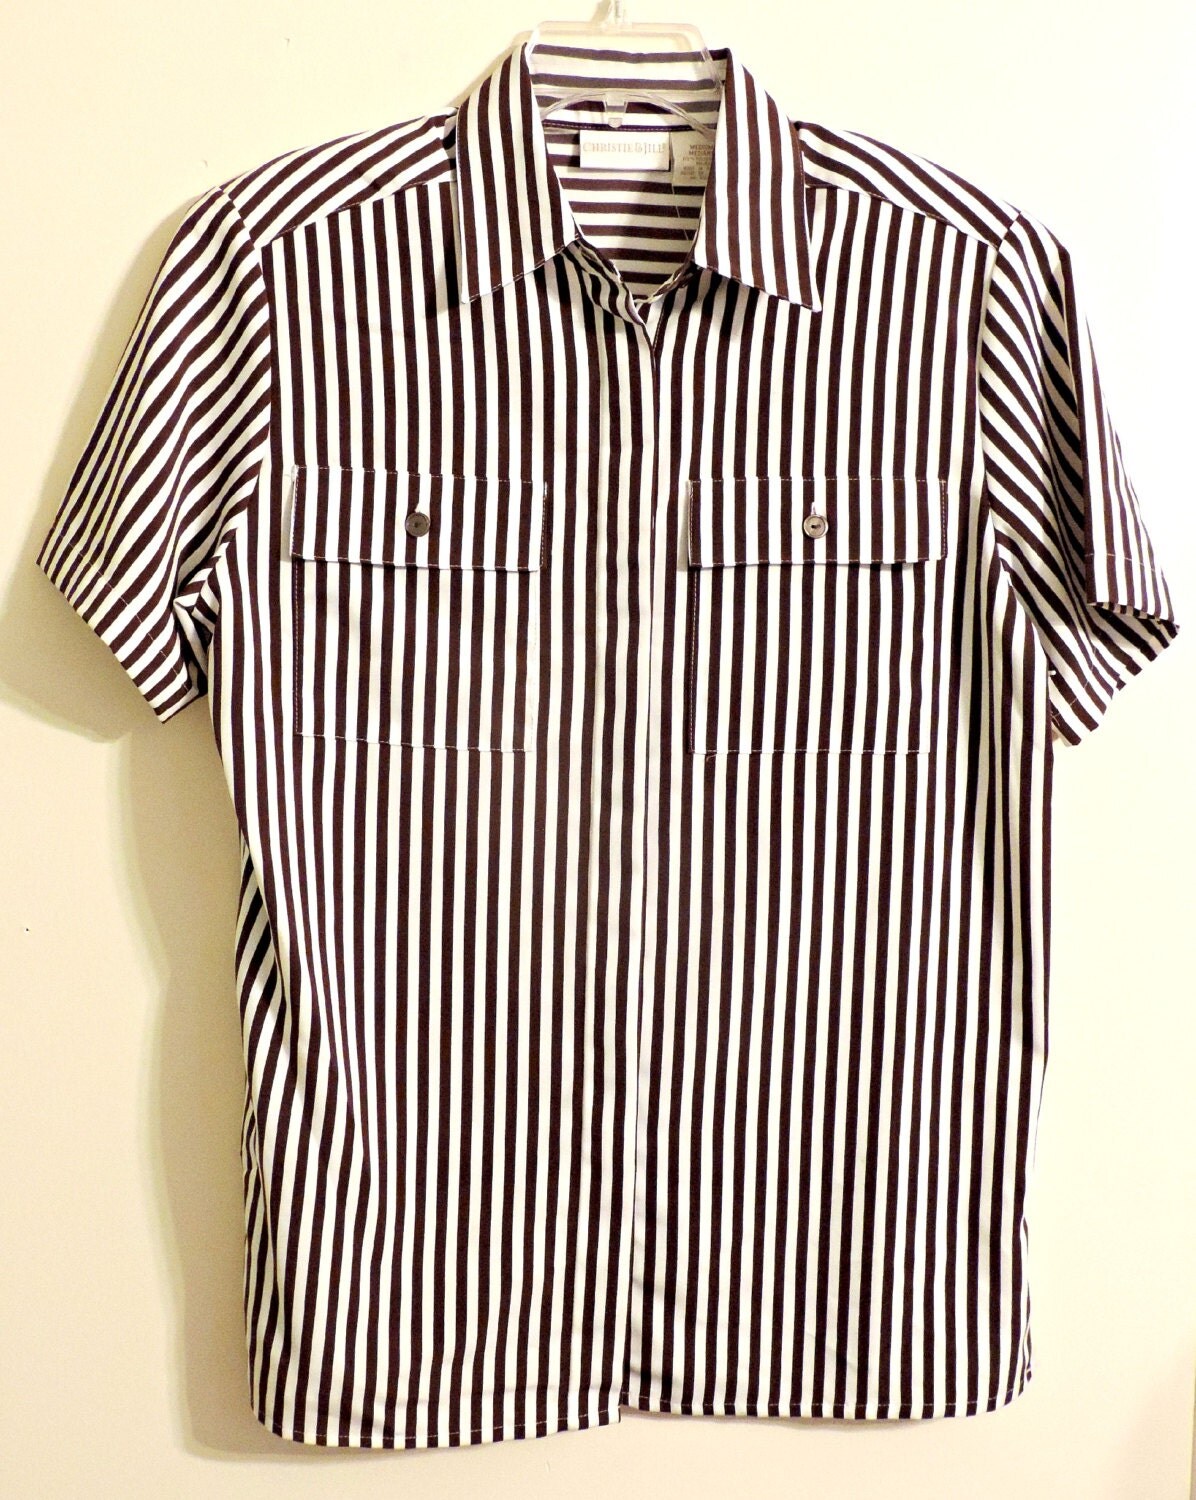 1980 S Ladies Shirt Striped Chocolate Brown And White By